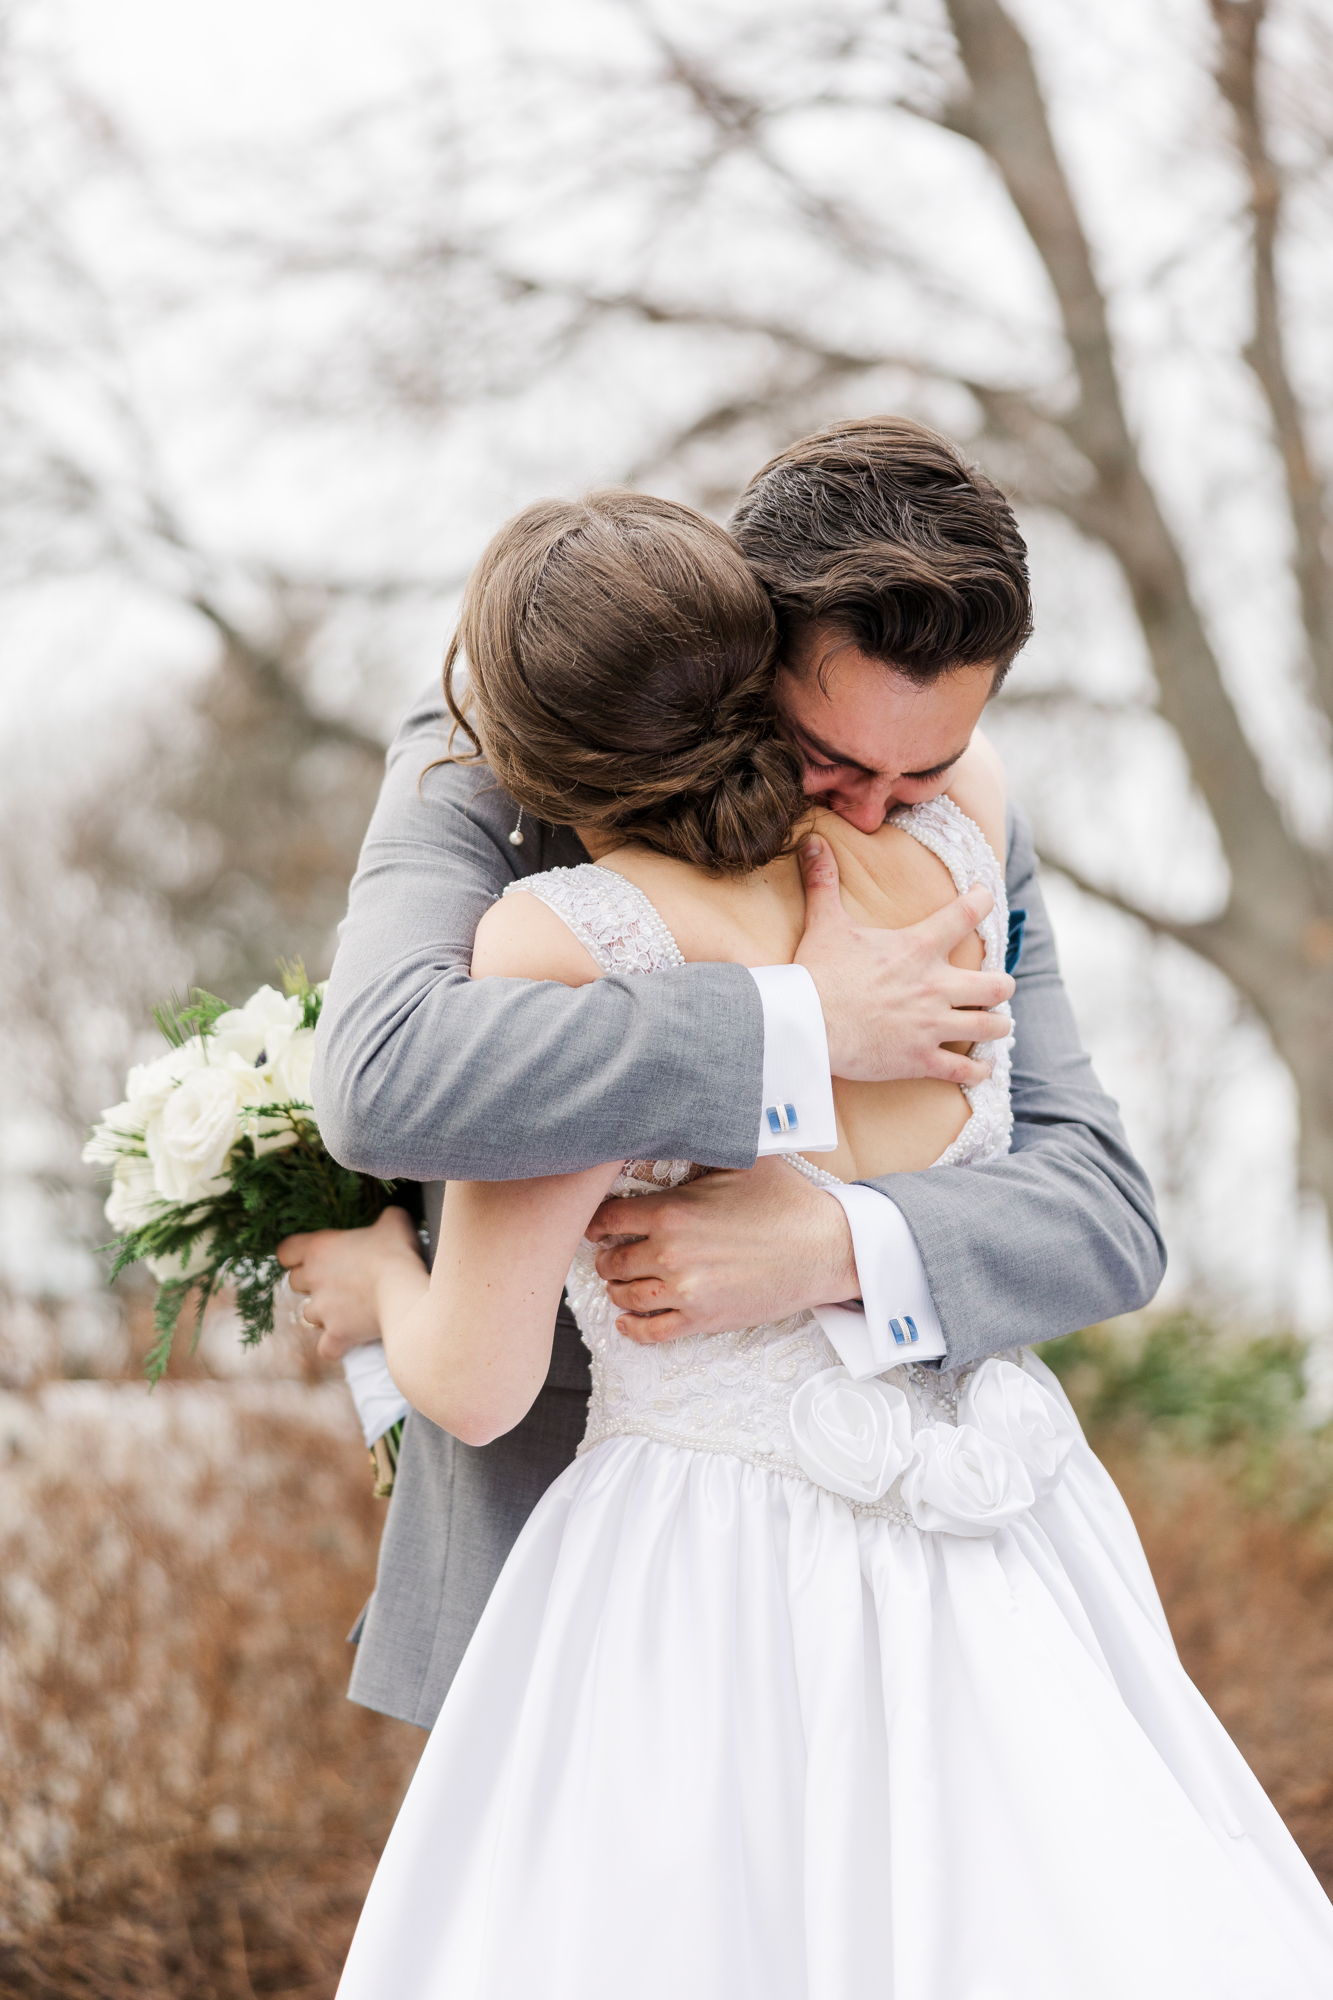 Romantic Briarcliff Manor Wedding in Upstate NY